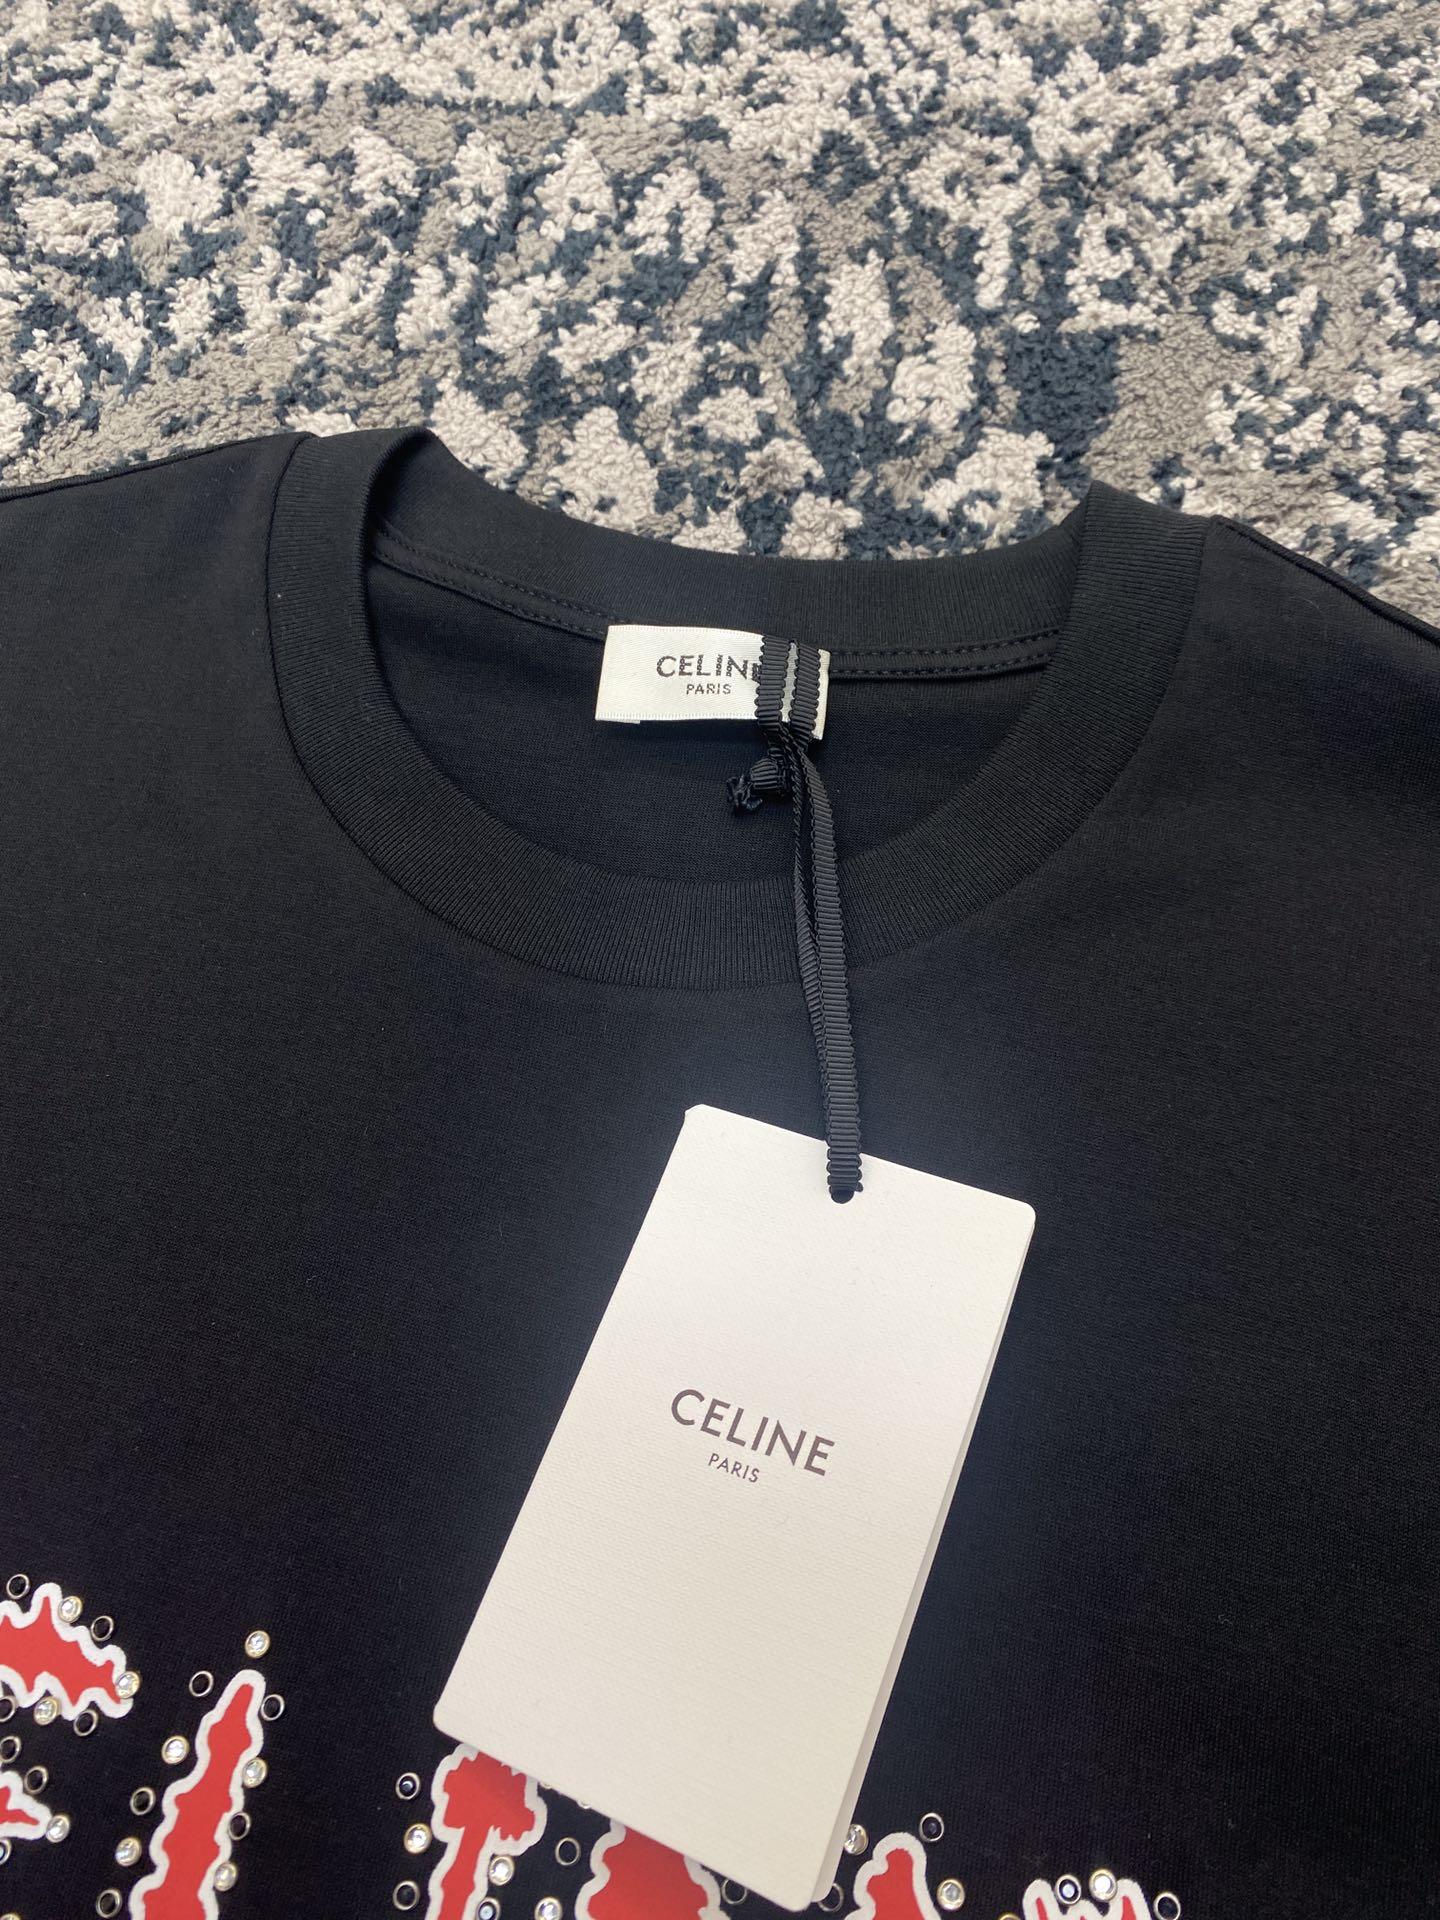 loose-celine-cotton-jersey-t-shirt-with-rhinestones-5845_16845010856-1000